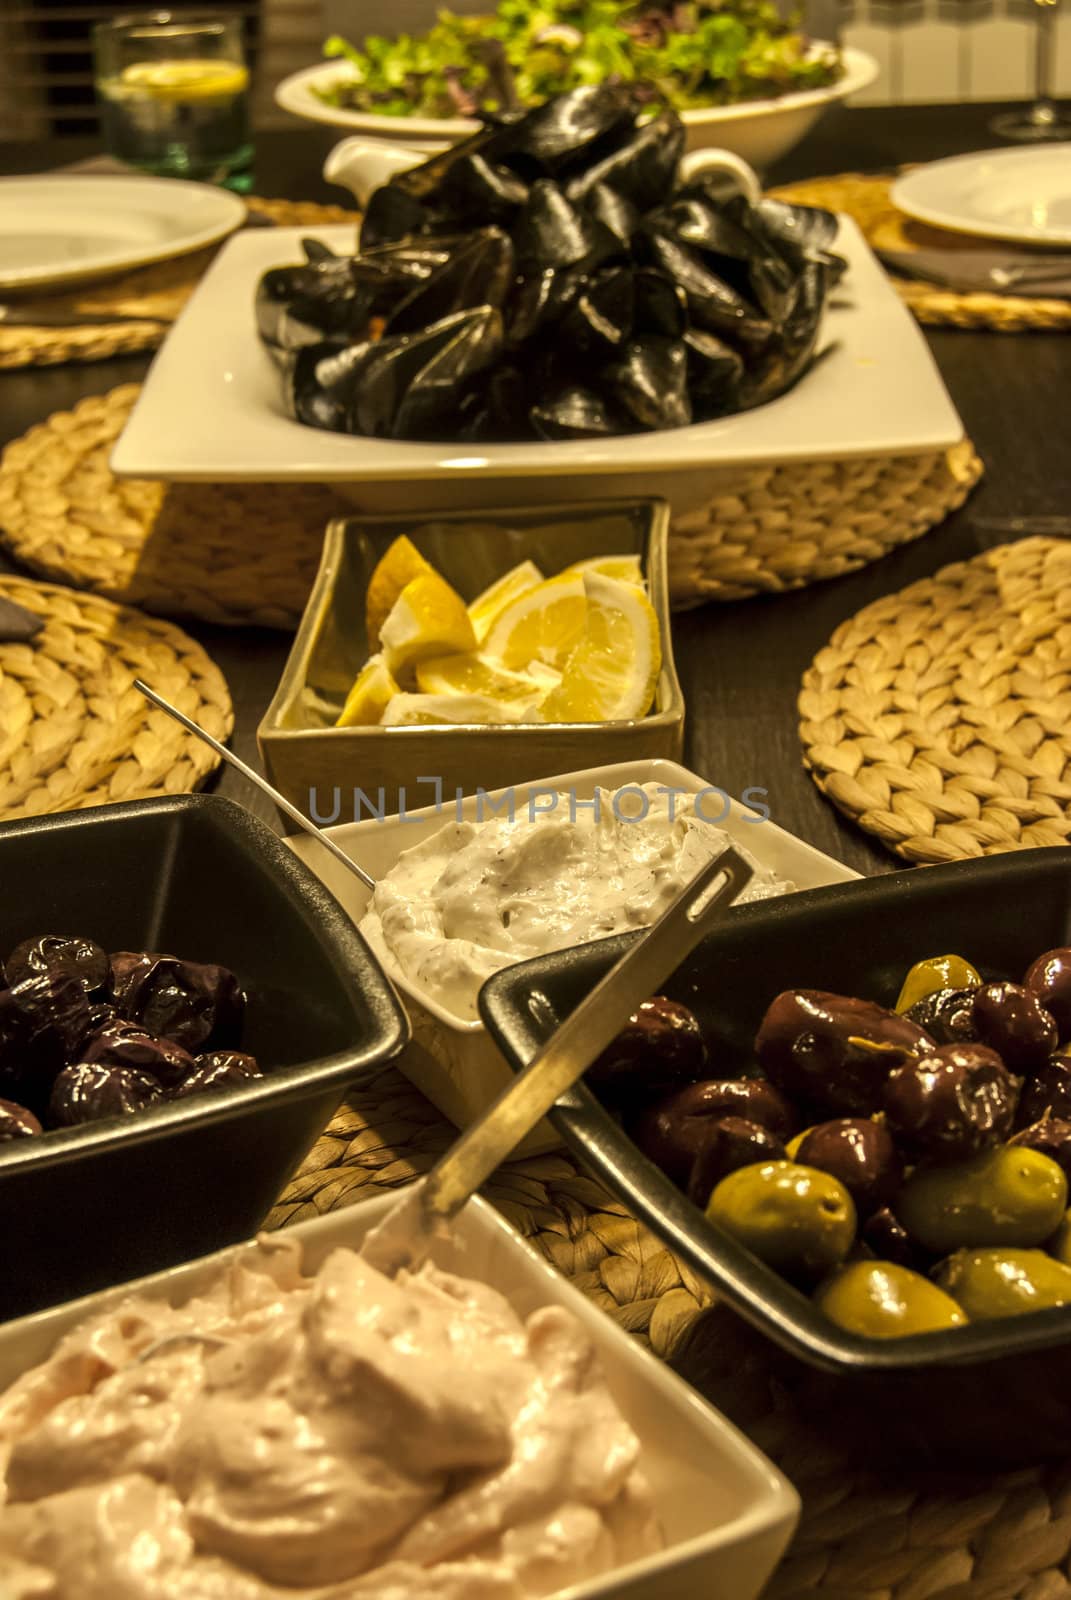 Dishes with mussels,olives,caviar by varbenov